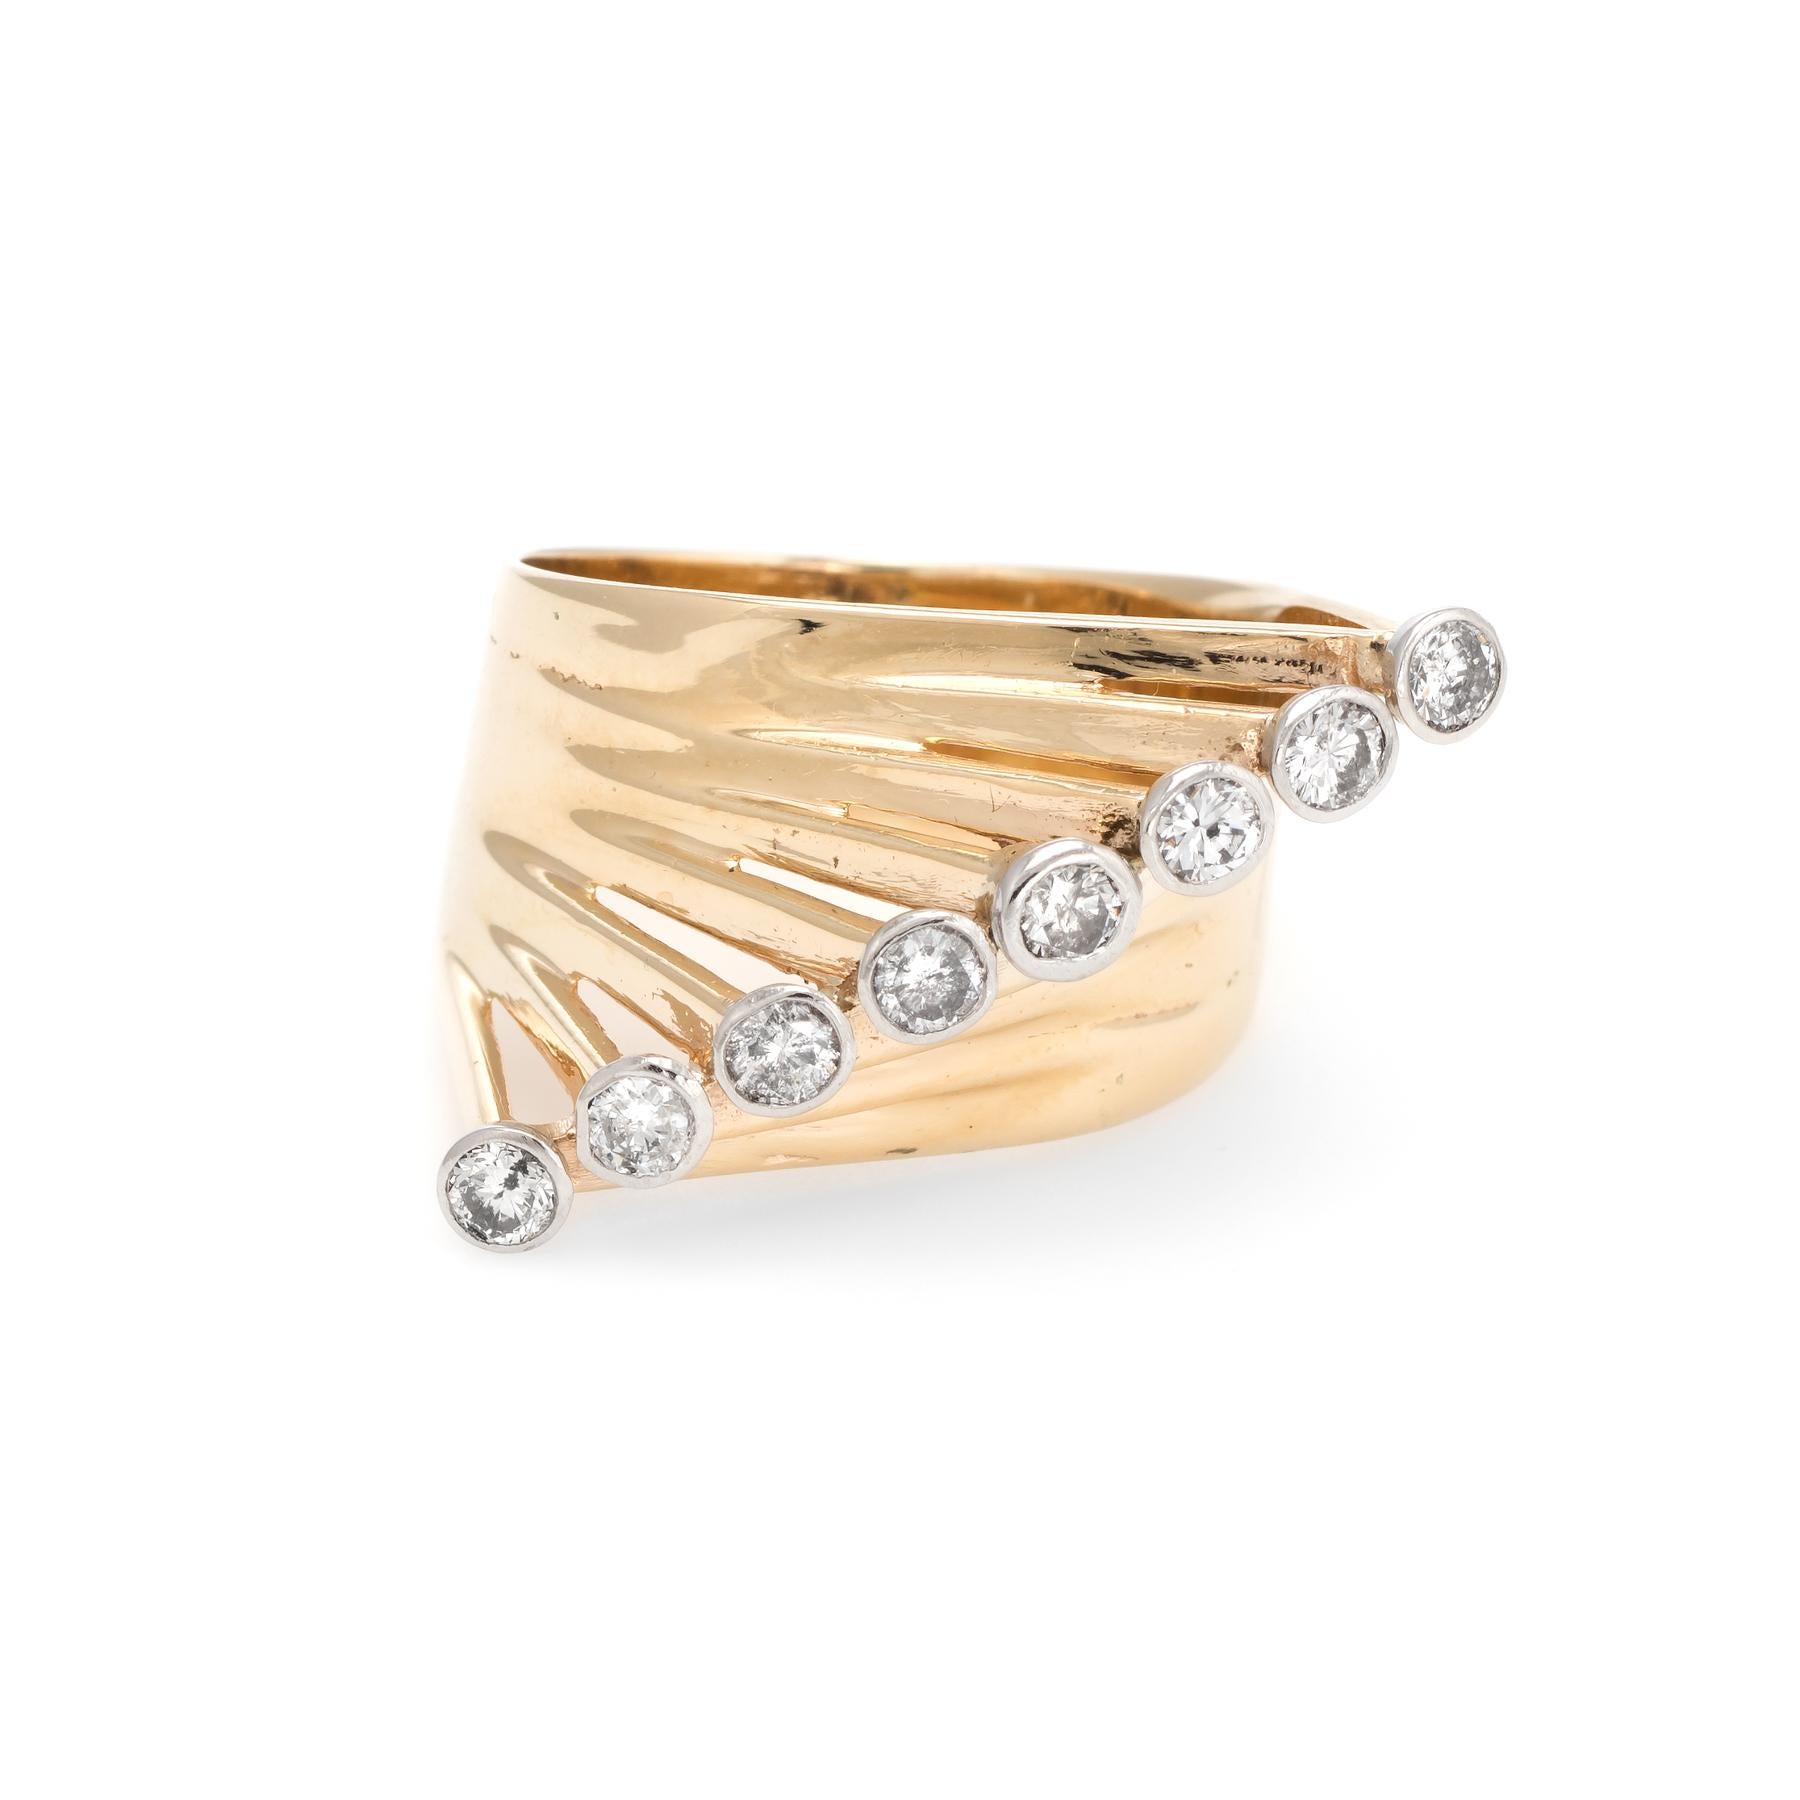 Circa 1960s, a large statement cocktail ring is crafted in 14 karat yellow gold. 

8 round brilliant cut diamonds are estimated at 0.05 carats each, totaling an estimated 0.40 carats (estimated at I-J color and I1 clarity).  

The east west design